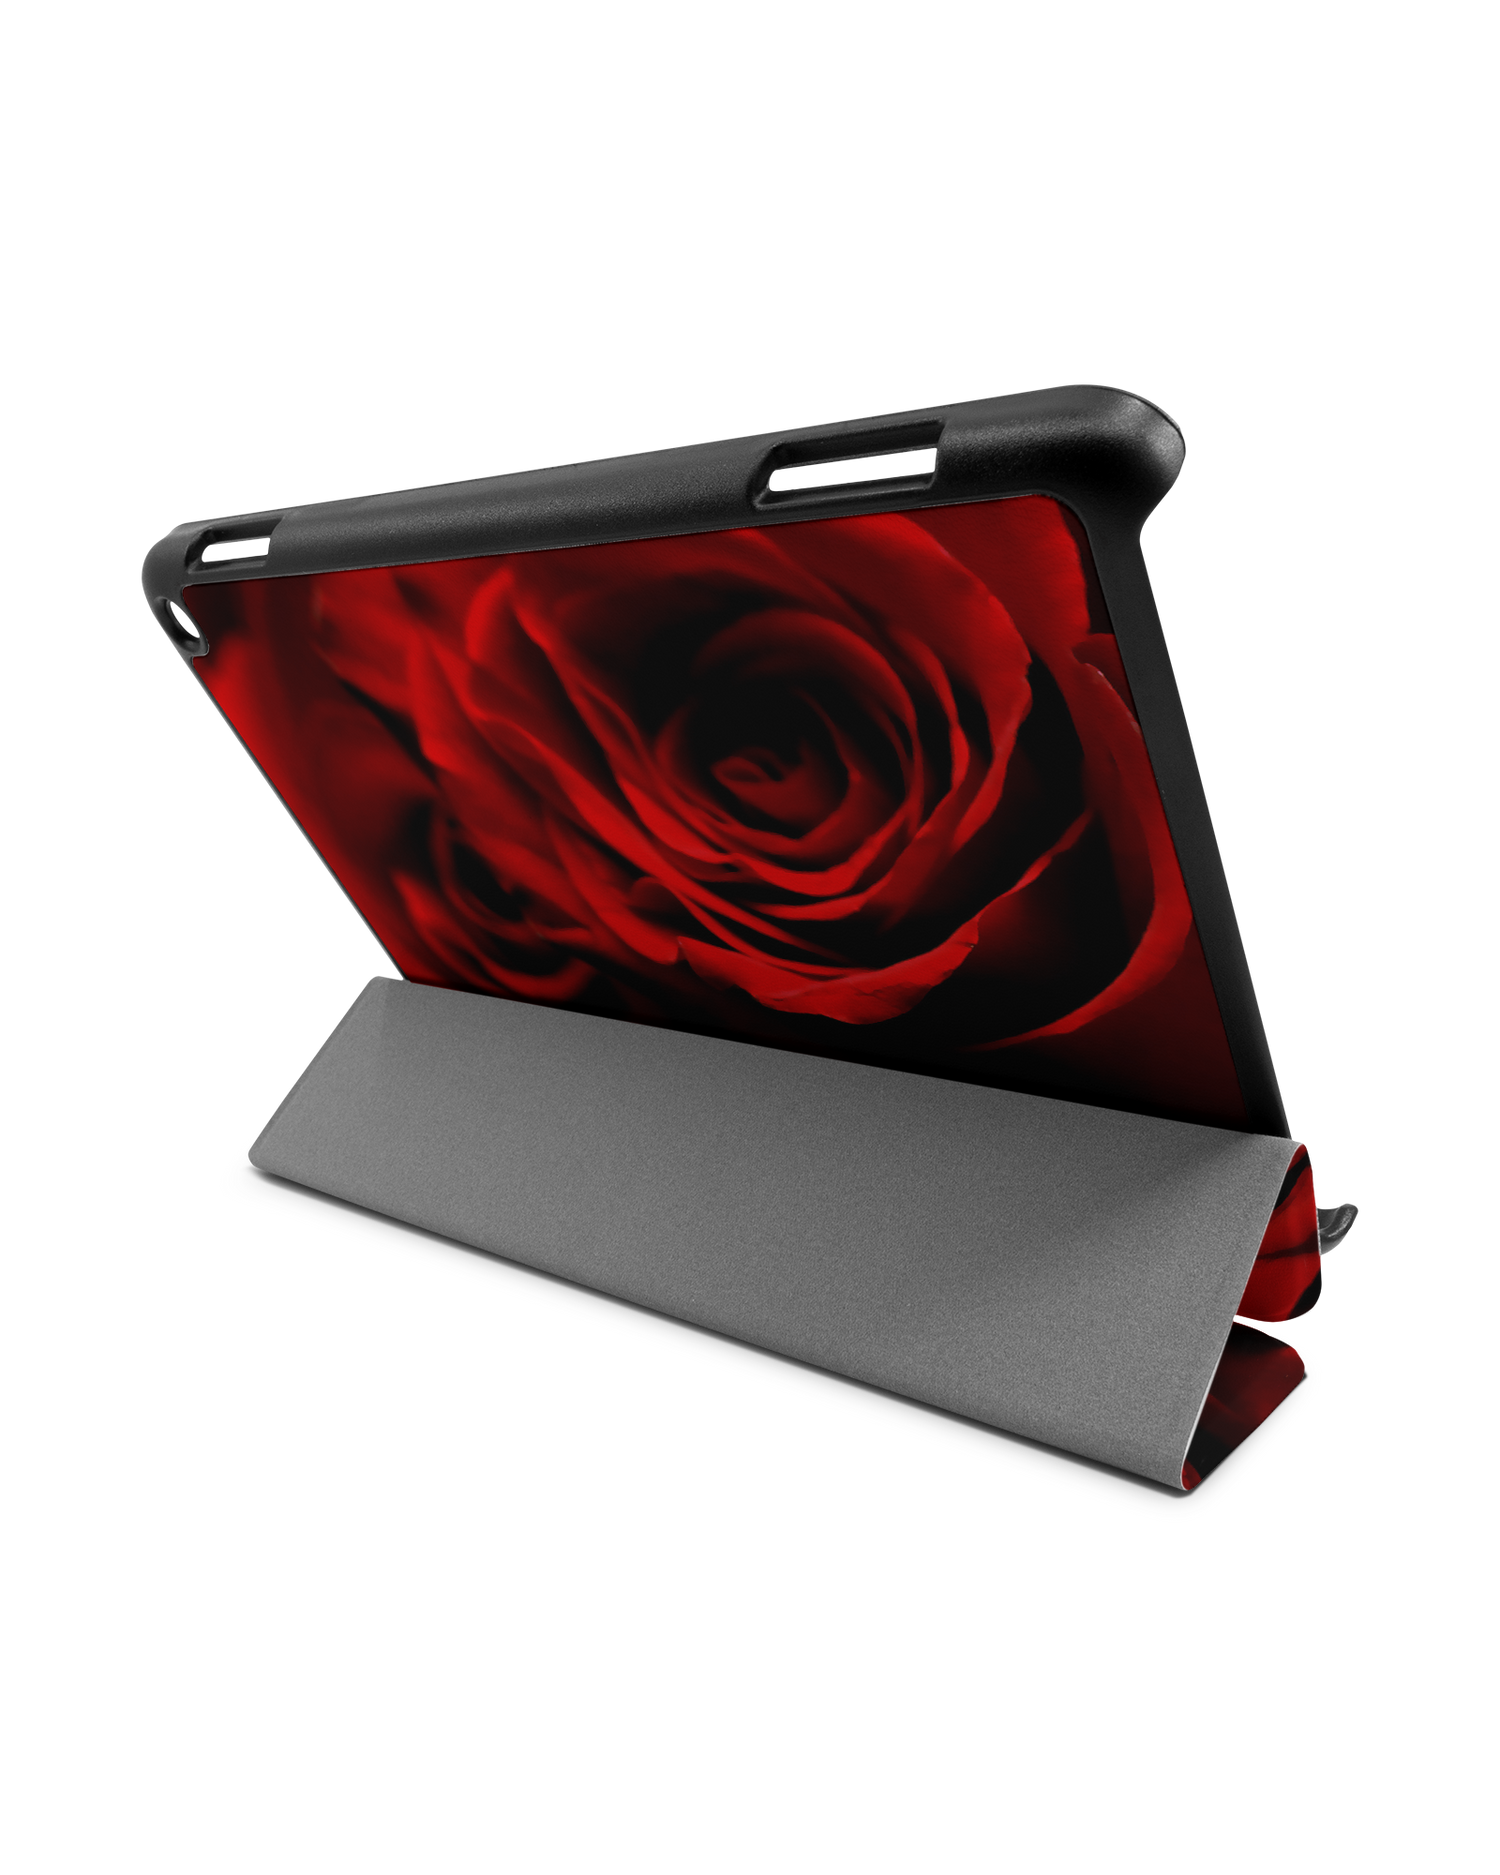 Red Roses Tablet Smart Case for Amazon Fire HD 8 (2022), Amazon Fire HD 8 Plus (2022), Amazon Fire HD 8 (2020), Amazon Fire HD 8 Plus (2020): Used as Stand